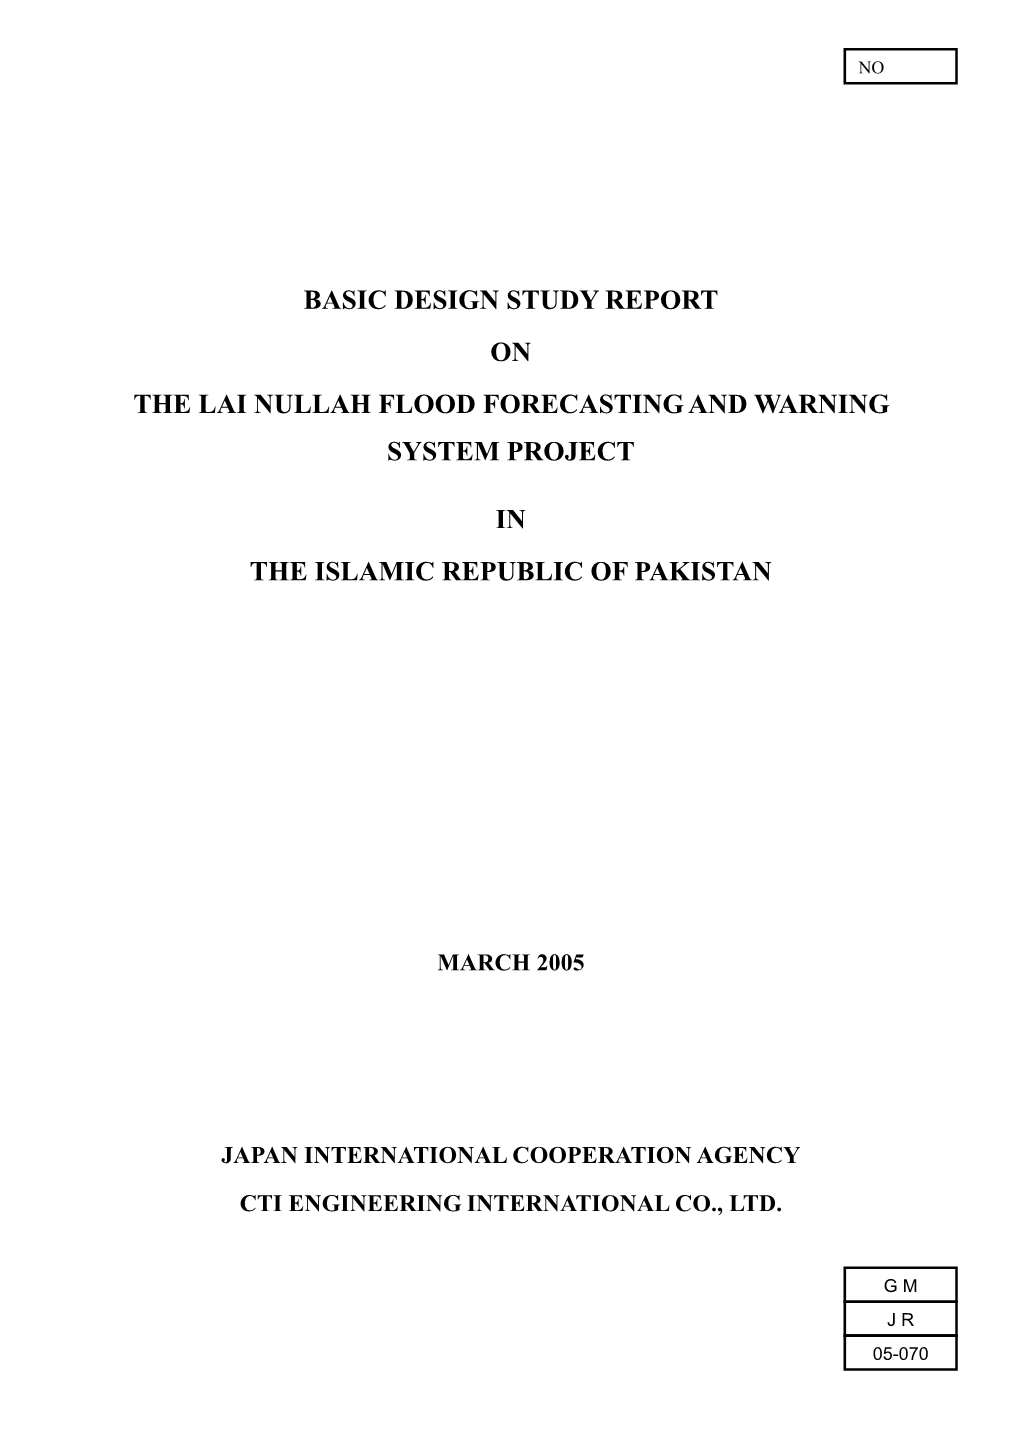 Basic Design Study Report on the Lai Nullah Flood Forecasting and Warning System Project in the Islamic Republic of Pakistan